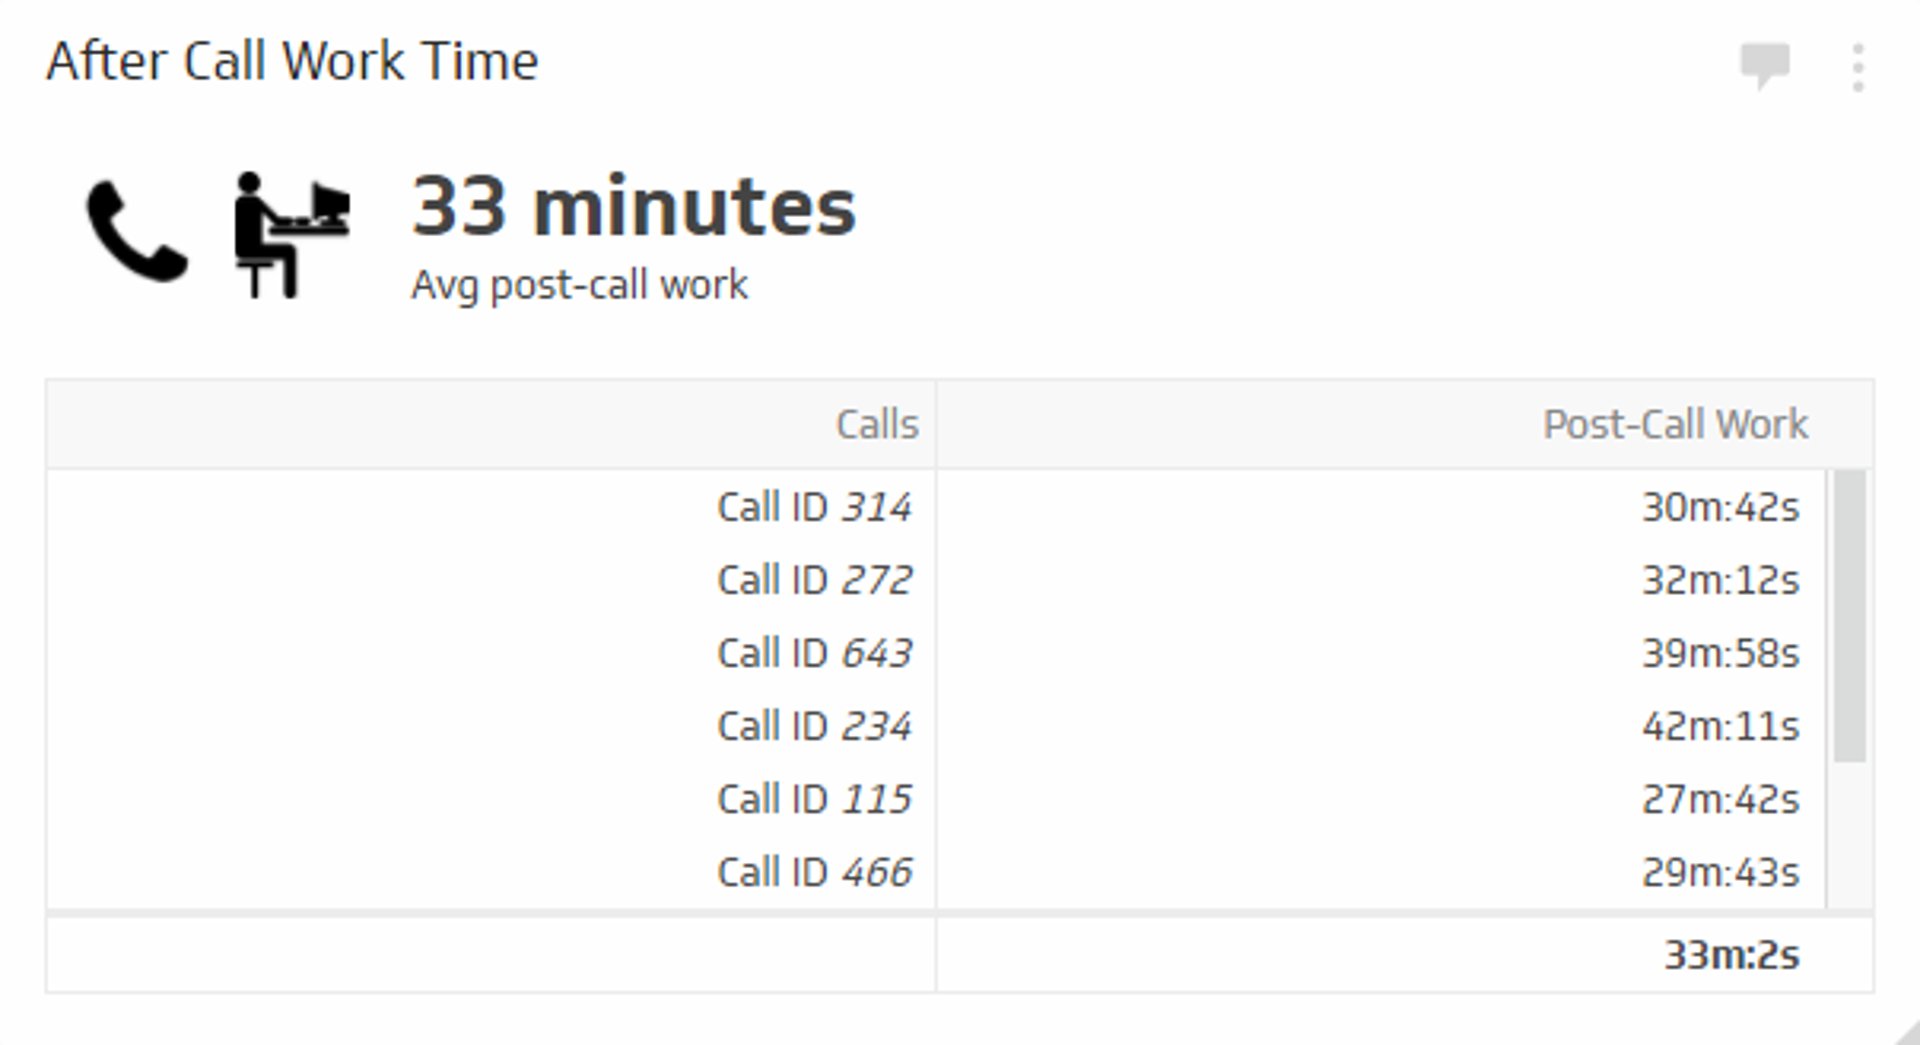 Call Center KPI Example - After Call Work Time Metric